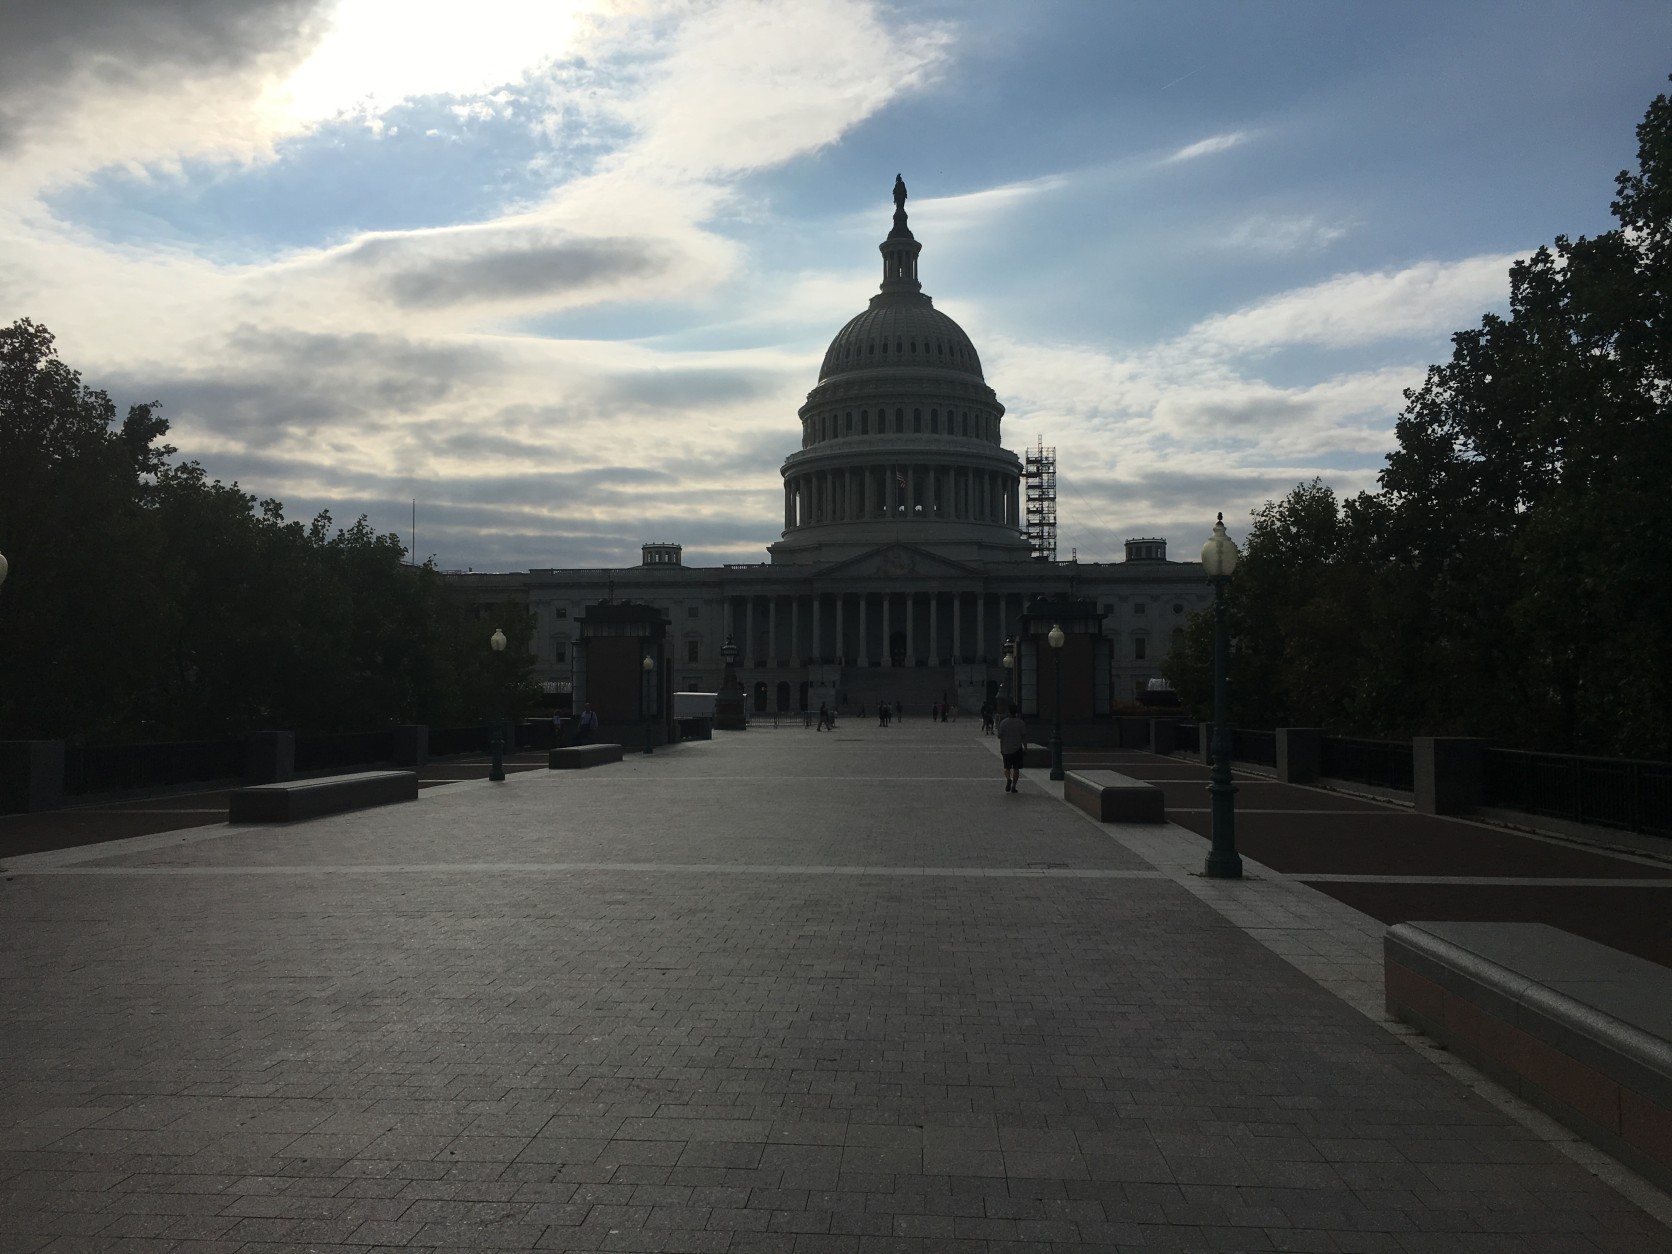 The scaffolding which has surrounded the U.S. Capitol since 2014 has been taken down. (WTOP/Mike Murillo)